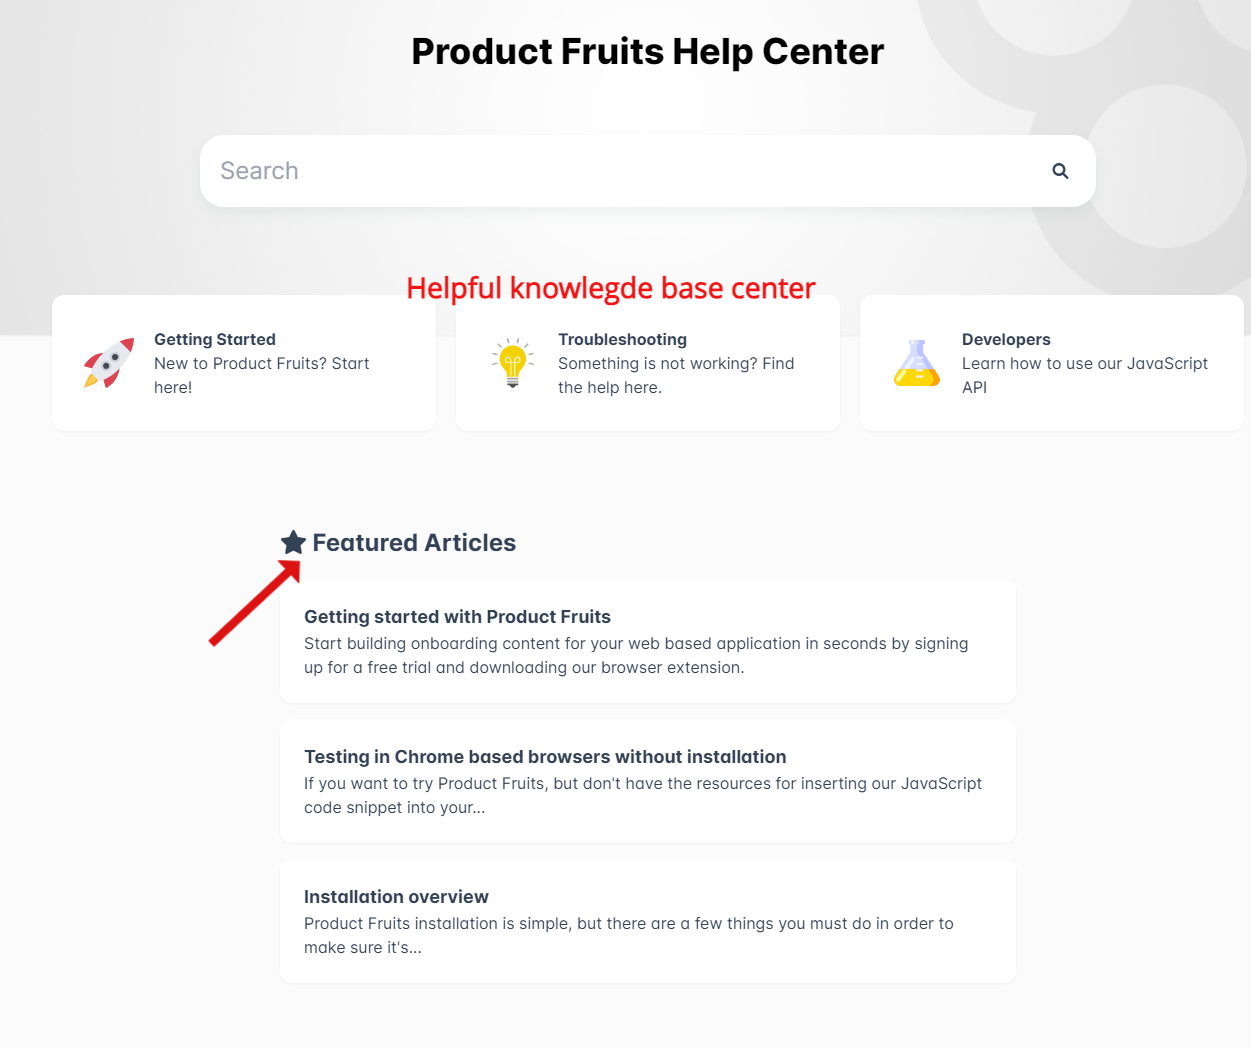 Product Fruits knowledge base center.
